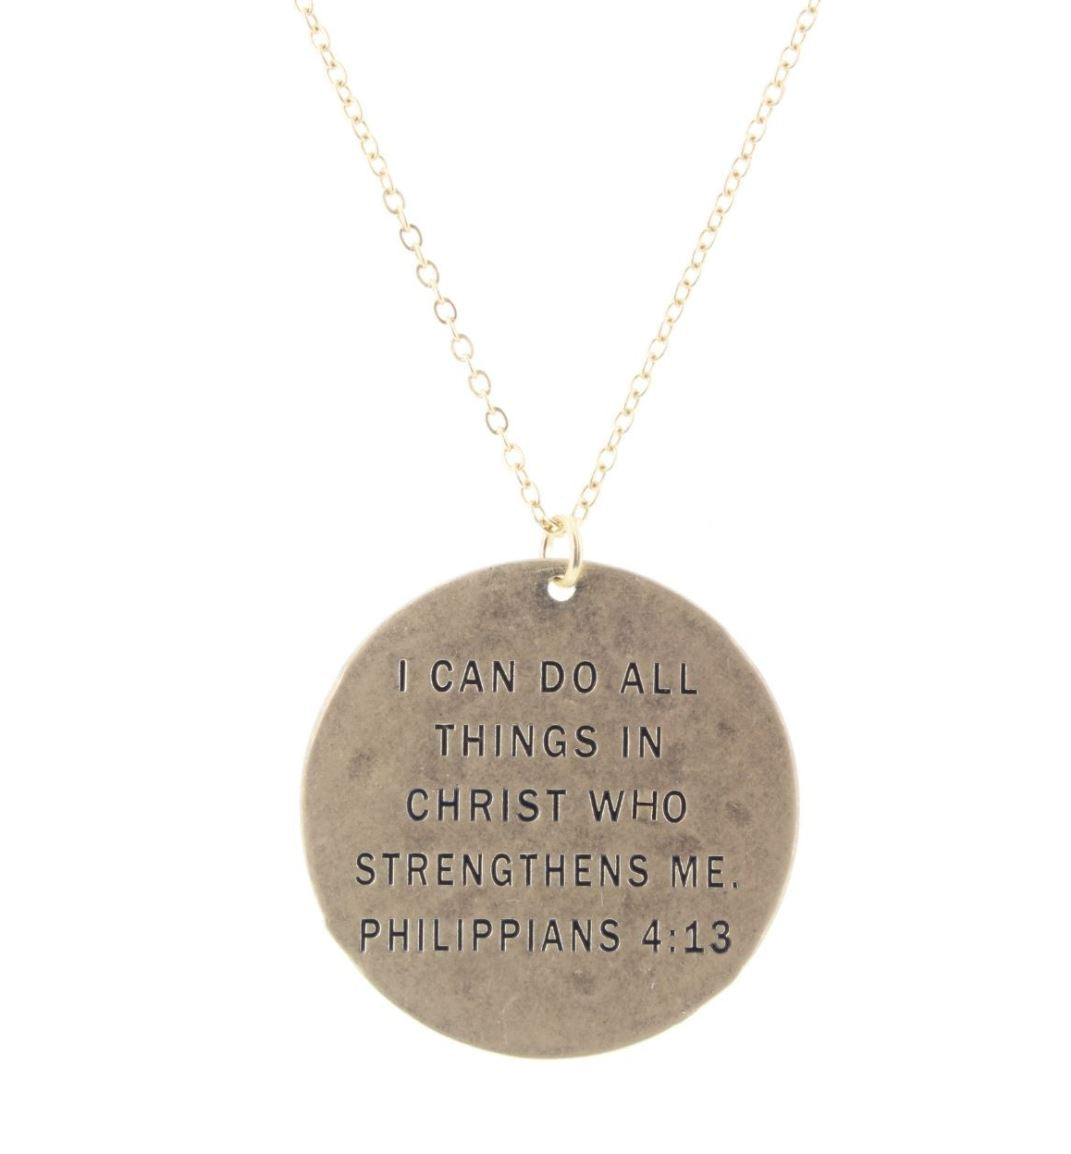 "I CAN DO ALL THINGS IN CHRIST" GOLD NECKLACE